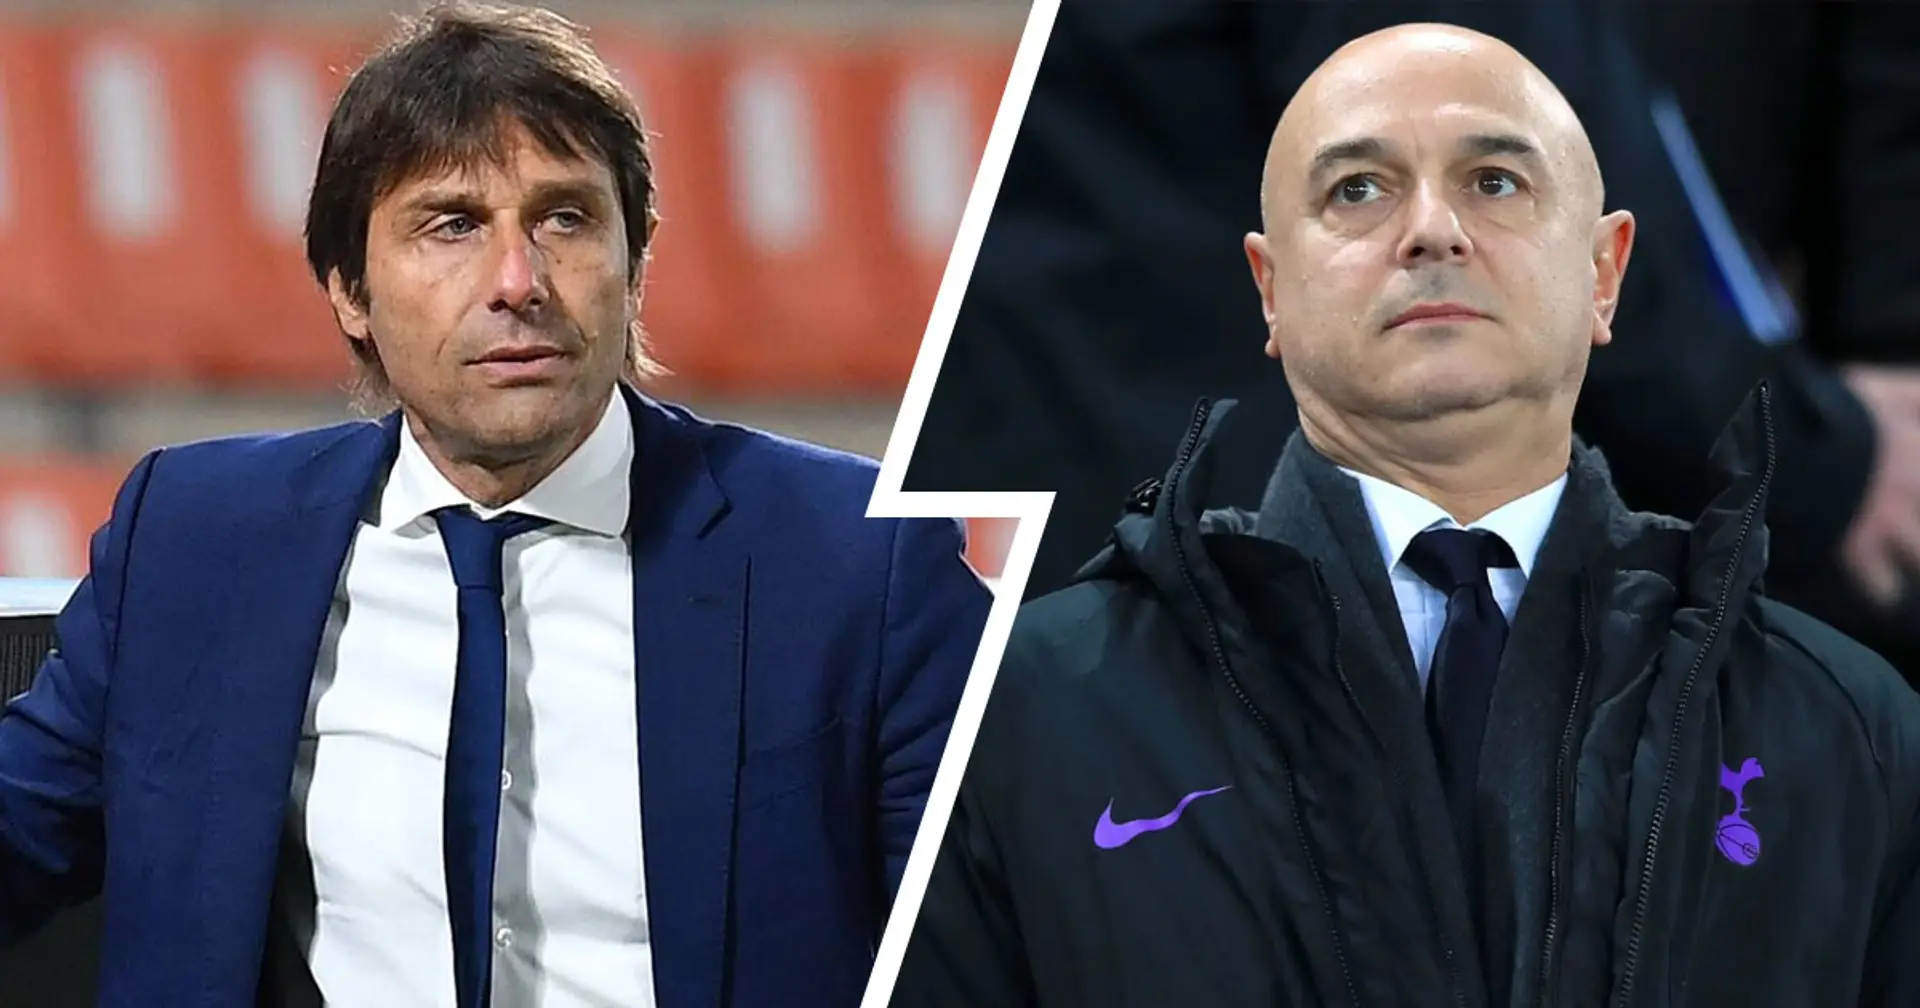 Antonio Conte 'ready' to become new Tottenham Hotspur manager